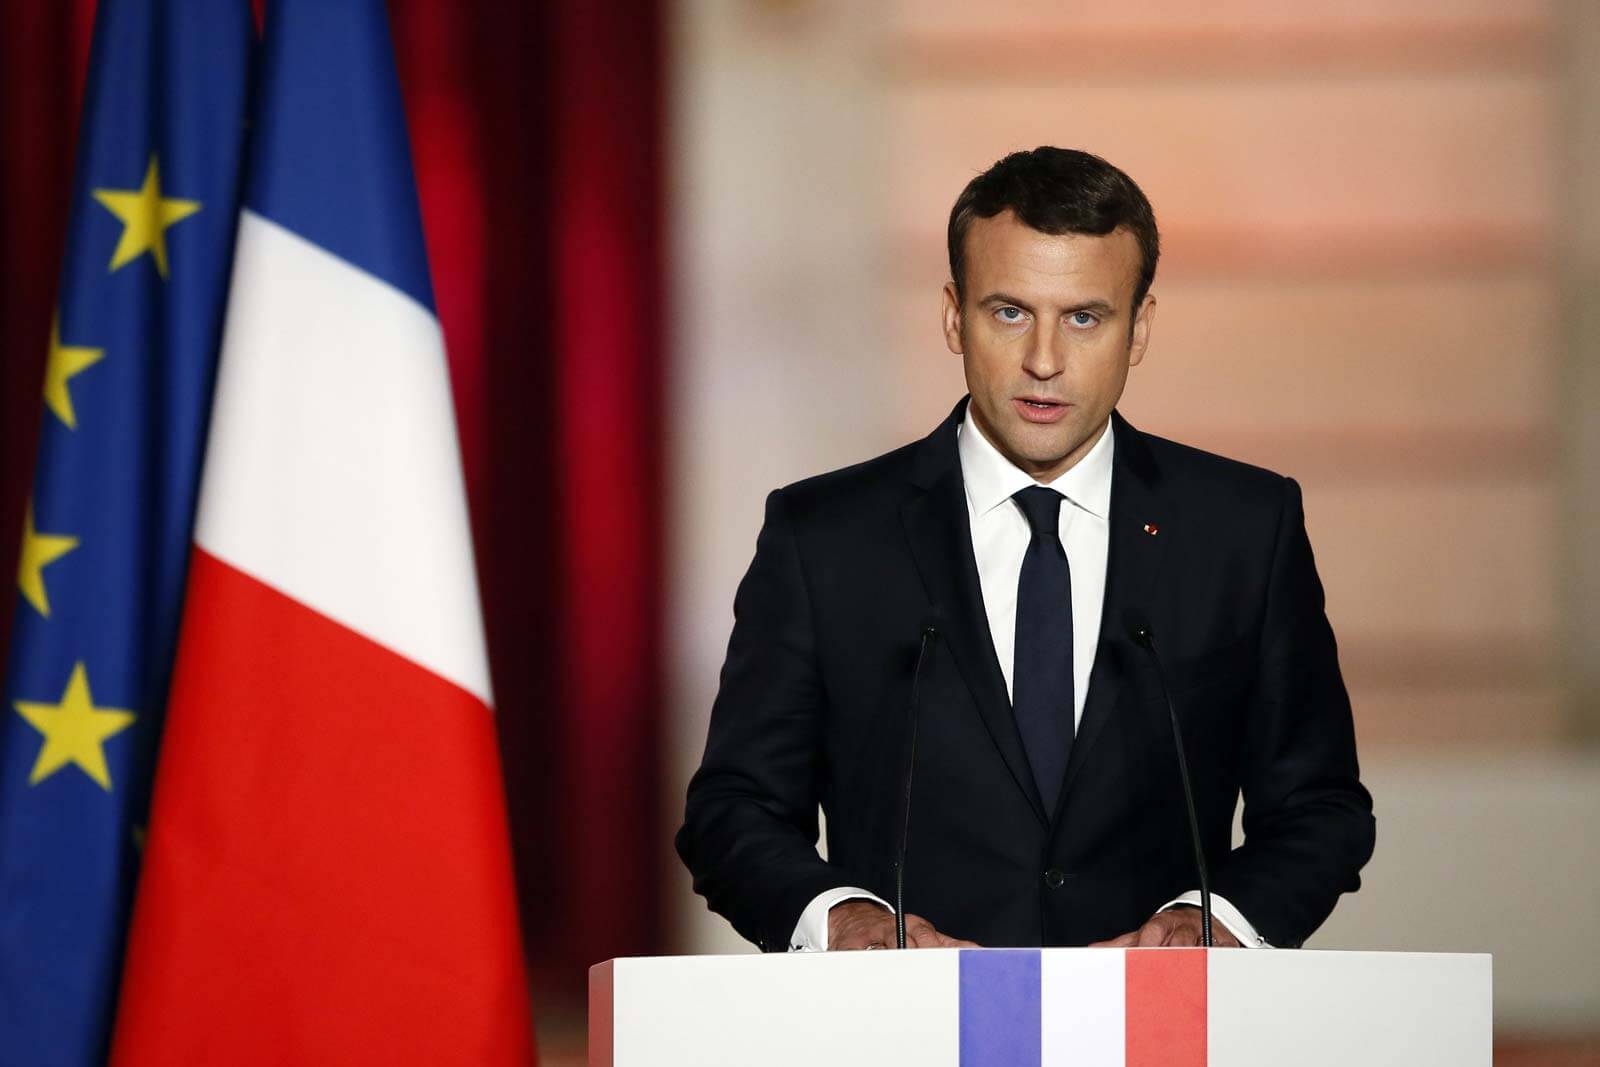 Macron to Host International Conference on Libya Today Ahead of December Elections